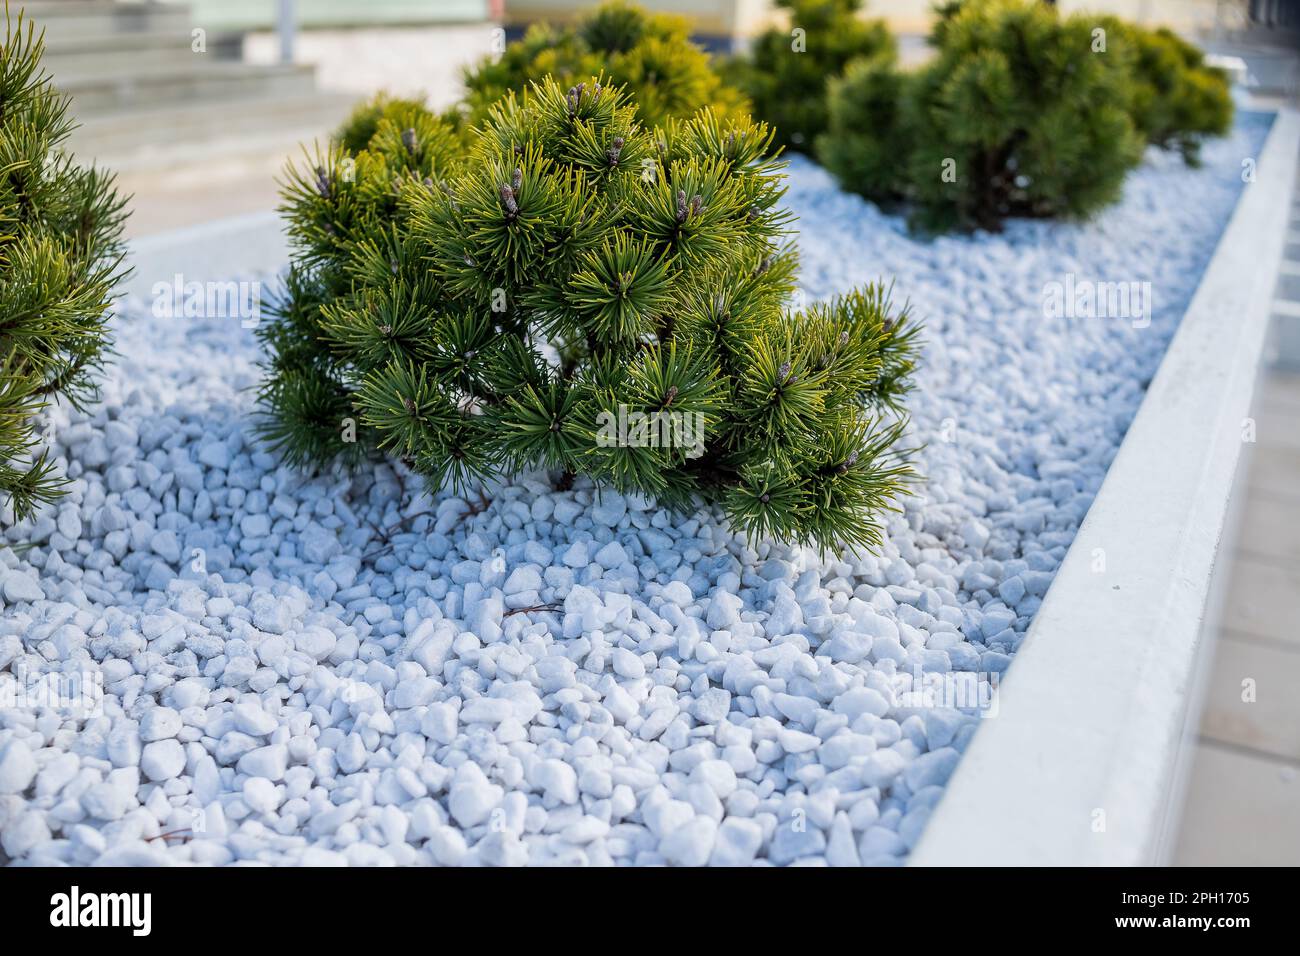 Coniferous rockery in landscaping. Different types of pine and spruce with different color needles.Cultivar dwarf mountain pine in the rocky garden Stock Photo